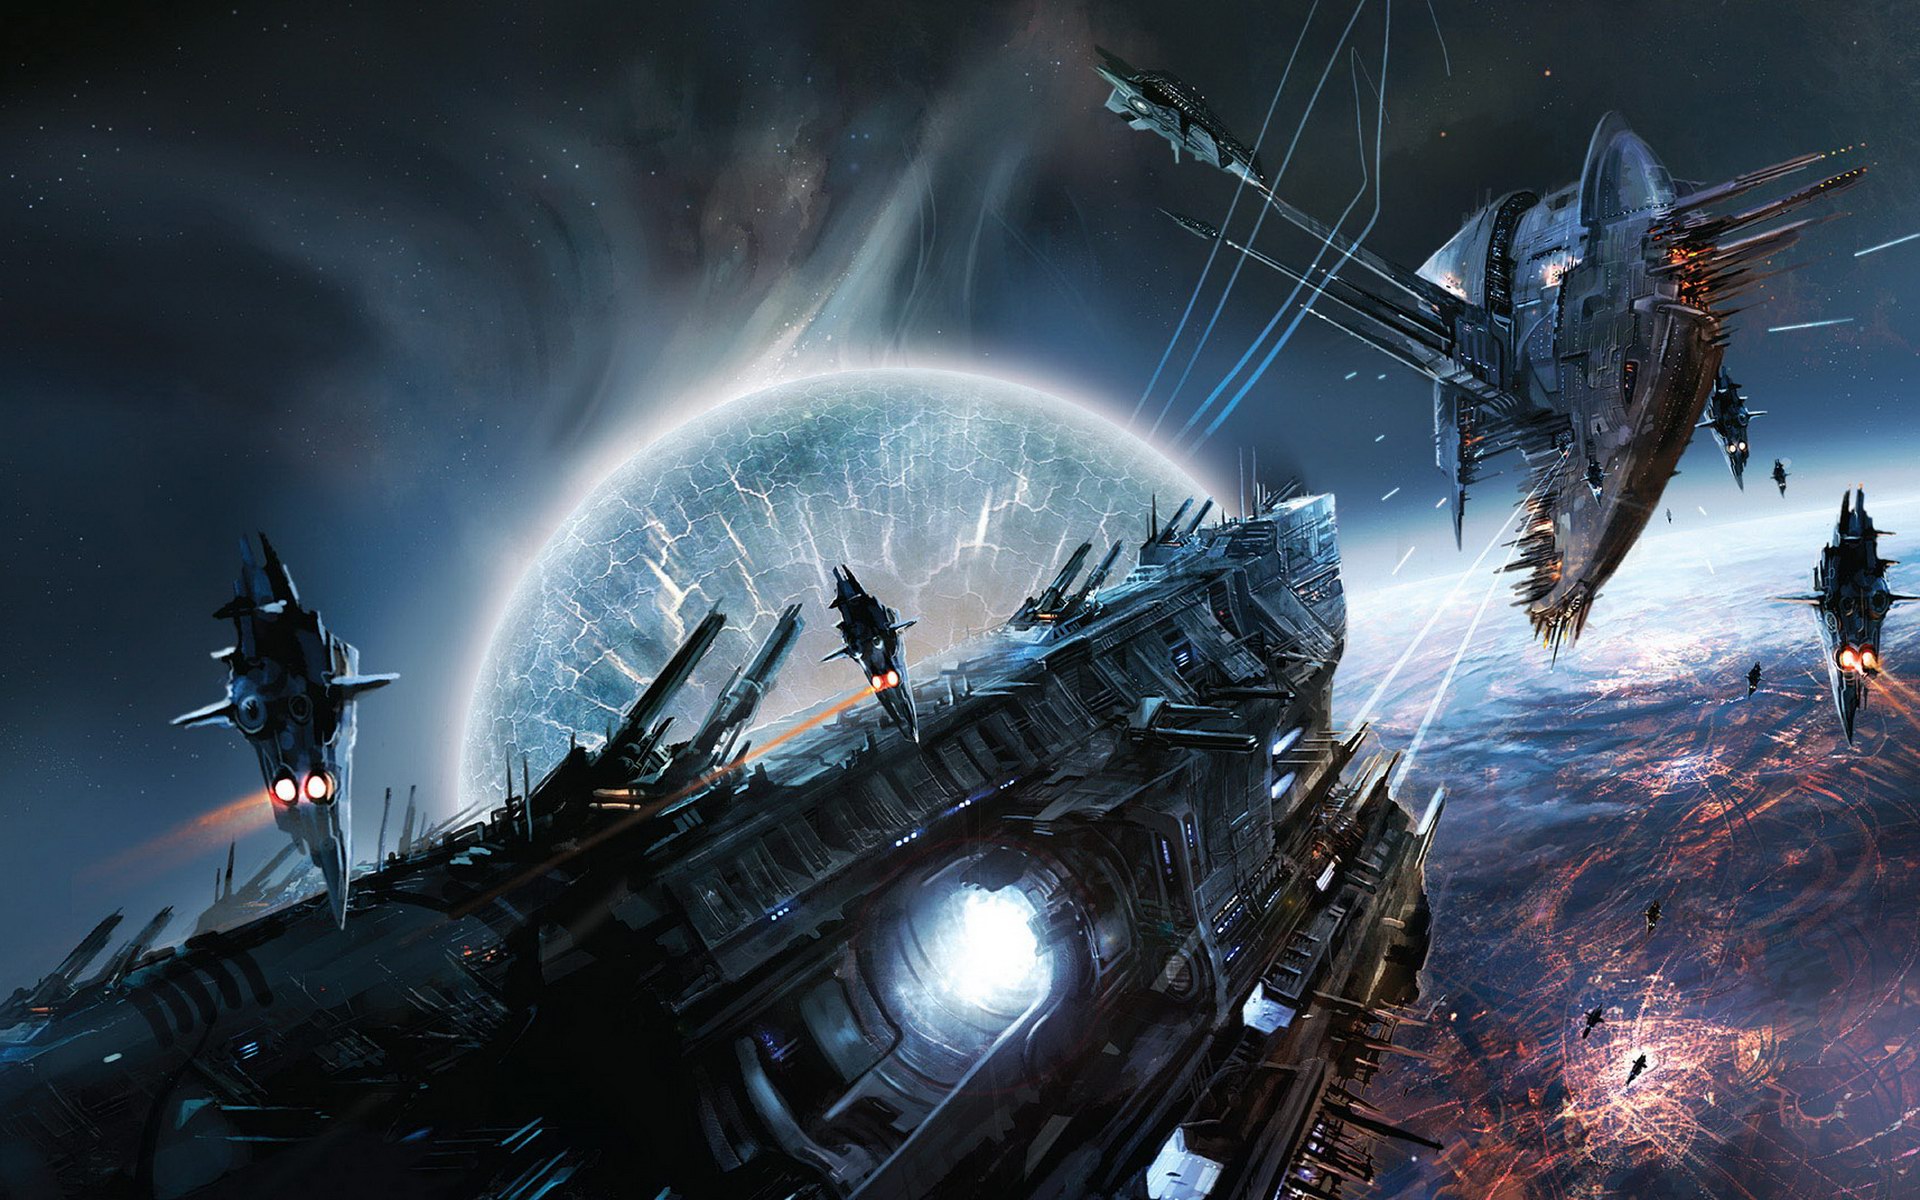 Space battle above a protected city: Capital ships clash in HD wallpaper, evoking a sense of war.